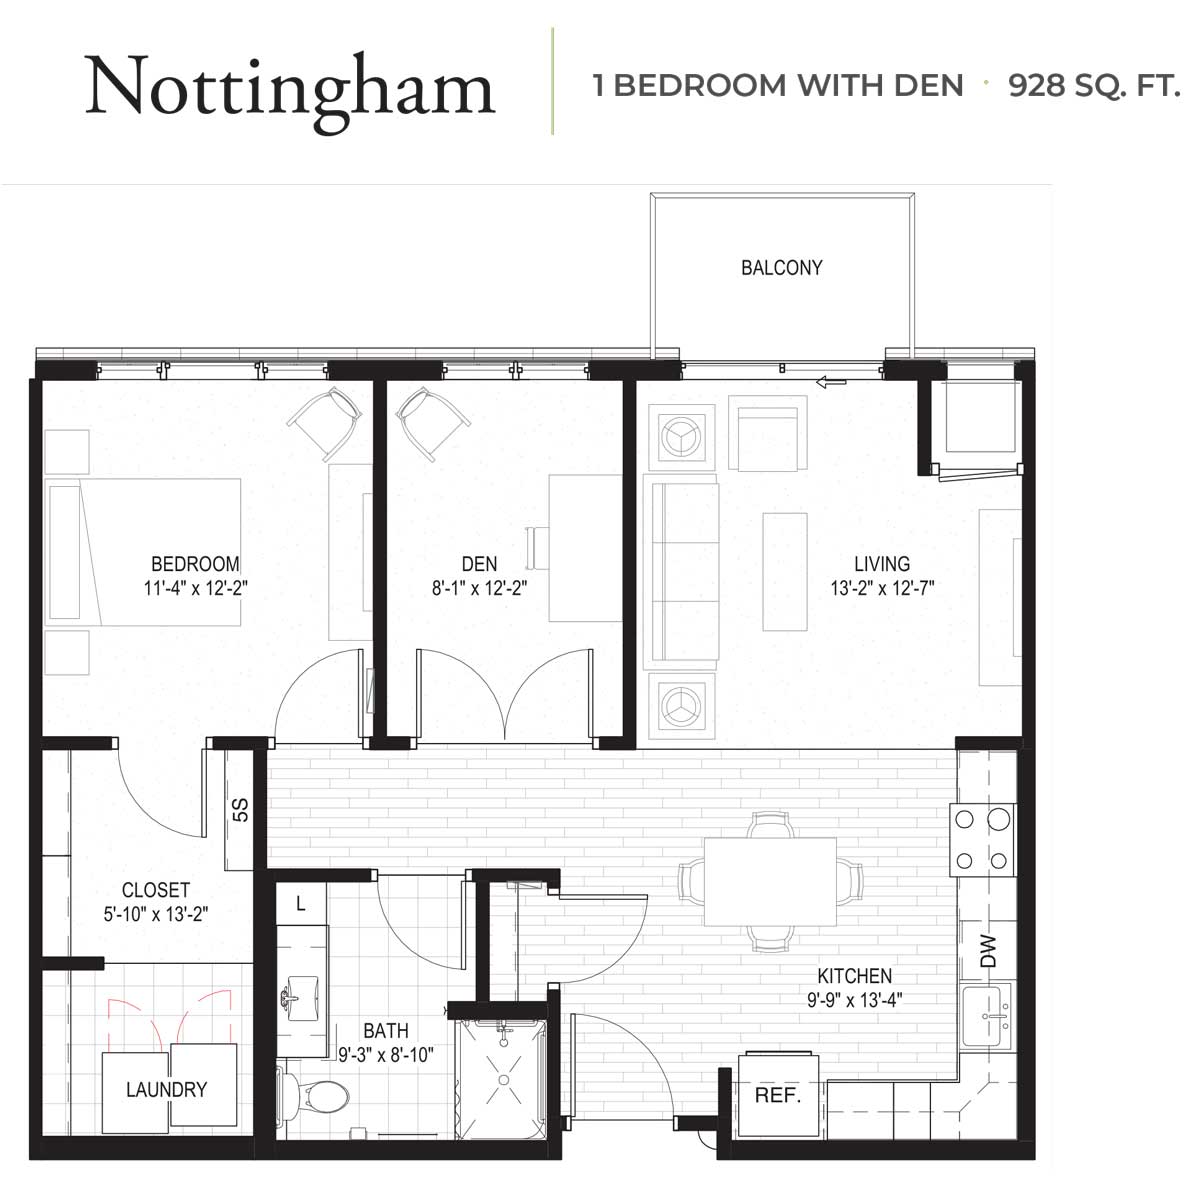 Floor plan for a one-bedroom apartment with den, named Nottingham, totaling 928 square feet.